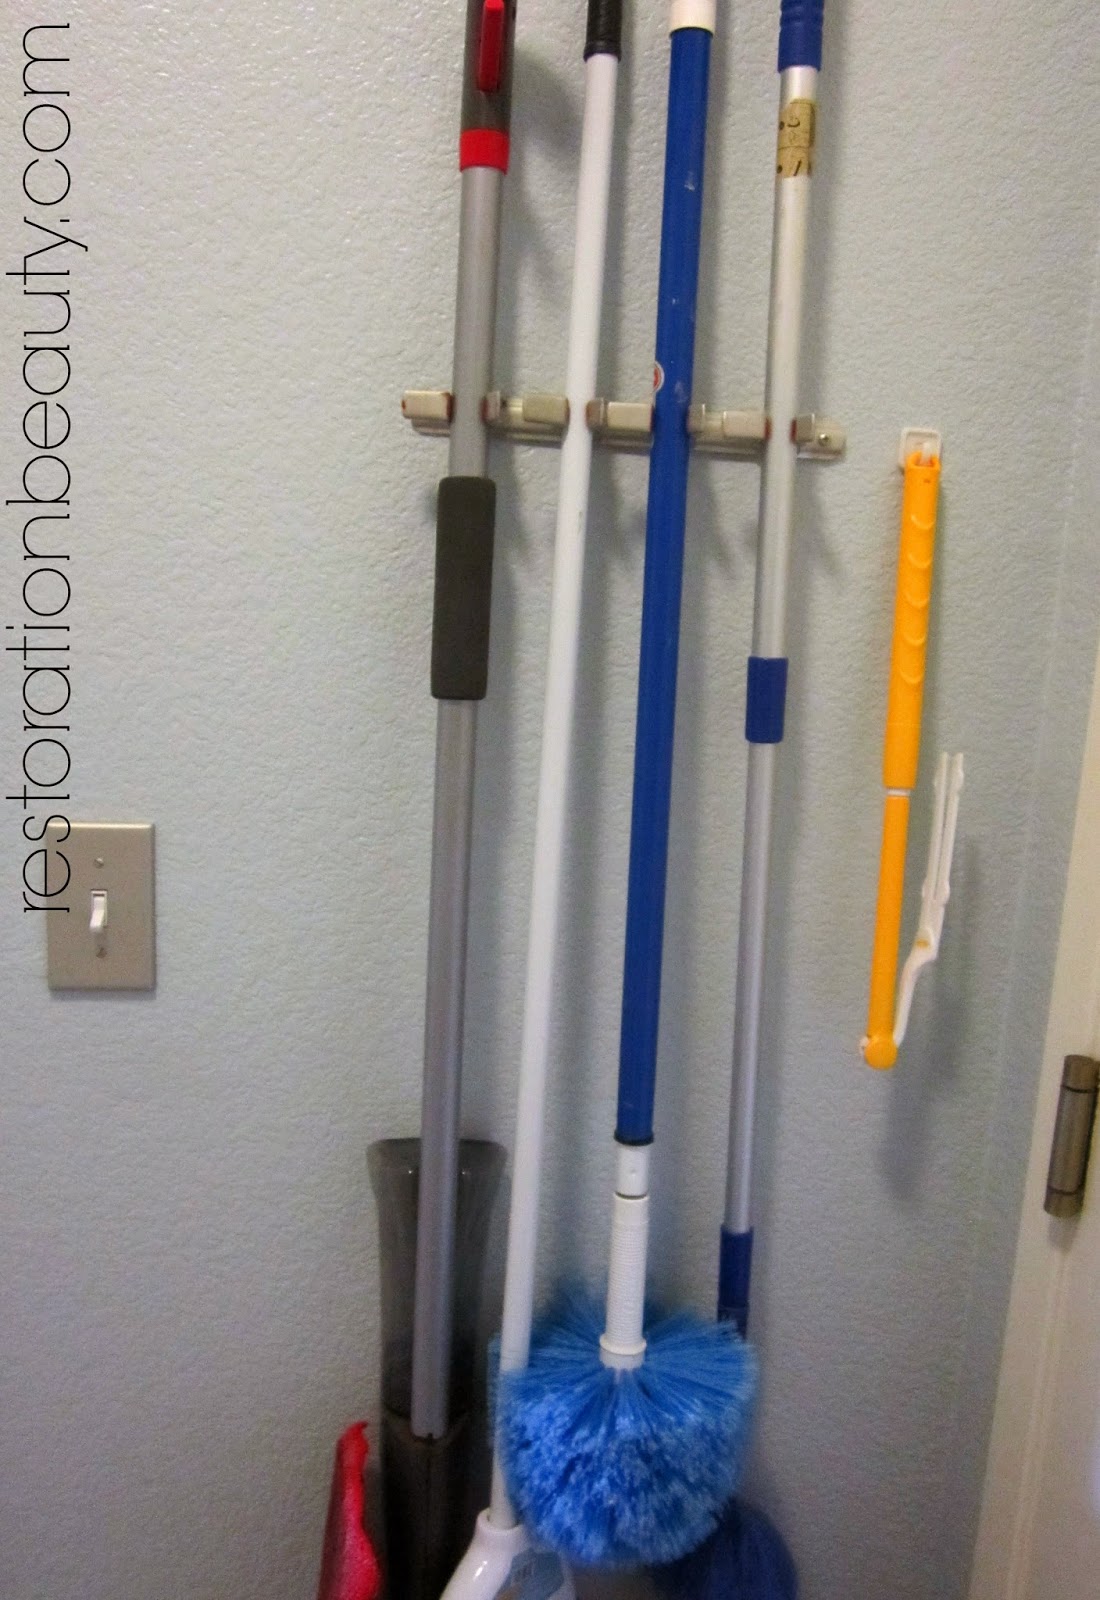 Restoration Beauty: Tips + Tricks for Keeping a Clean & Tidy Laundry Room1100 x 1600